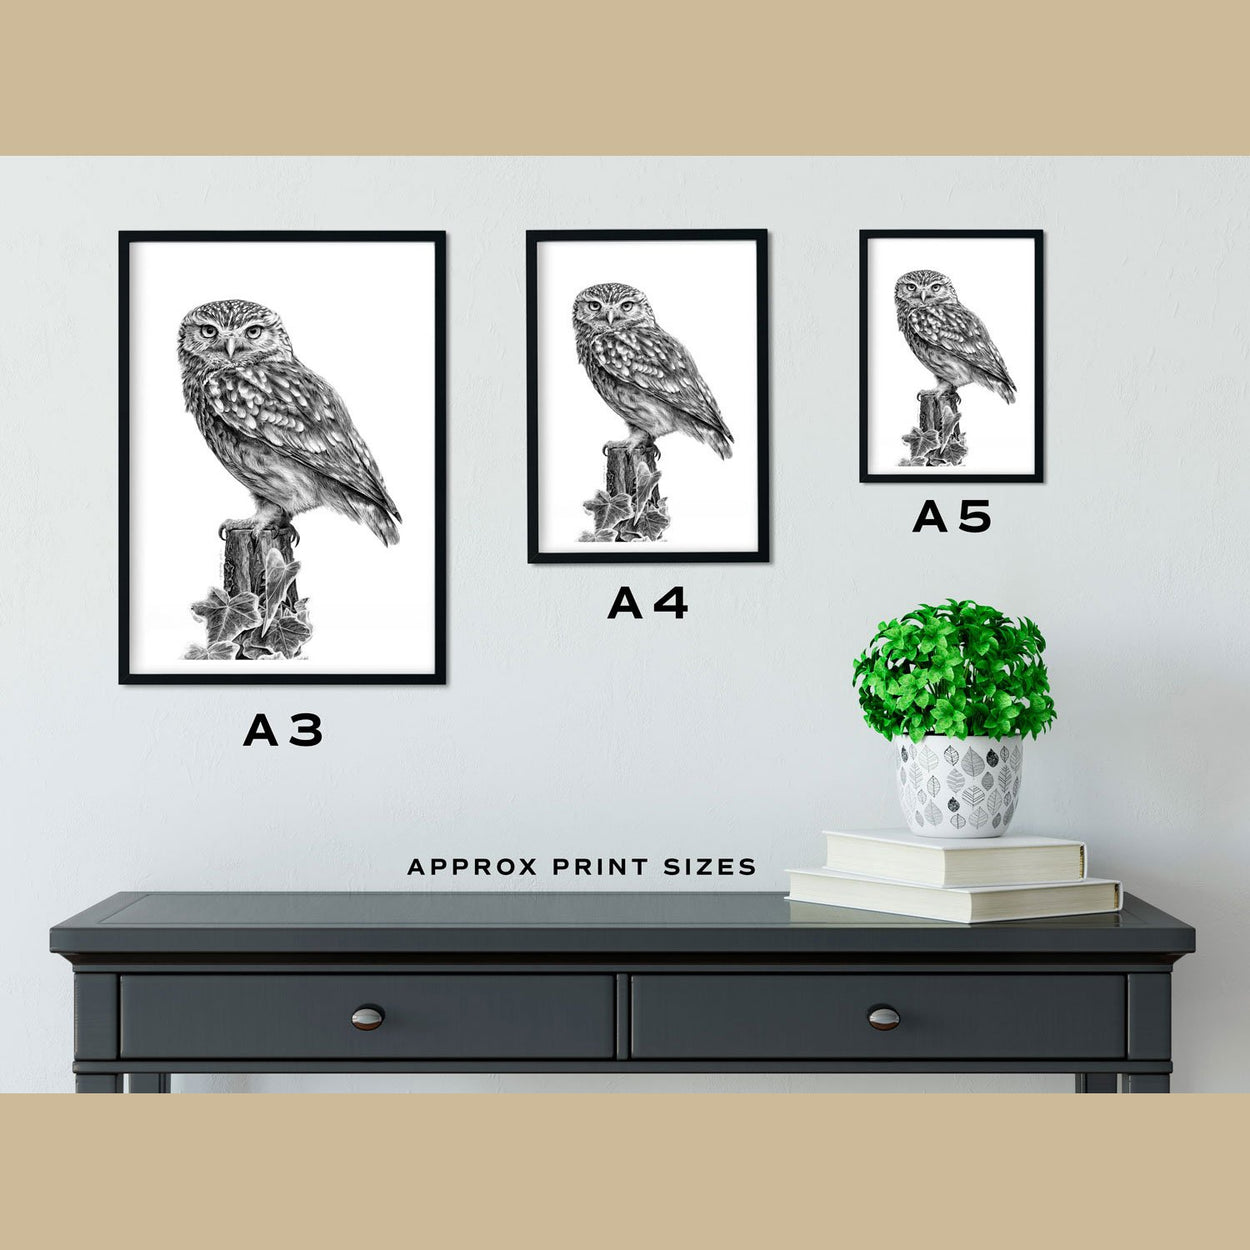 Little Owl Print Size Comparison - The Thriving Wild